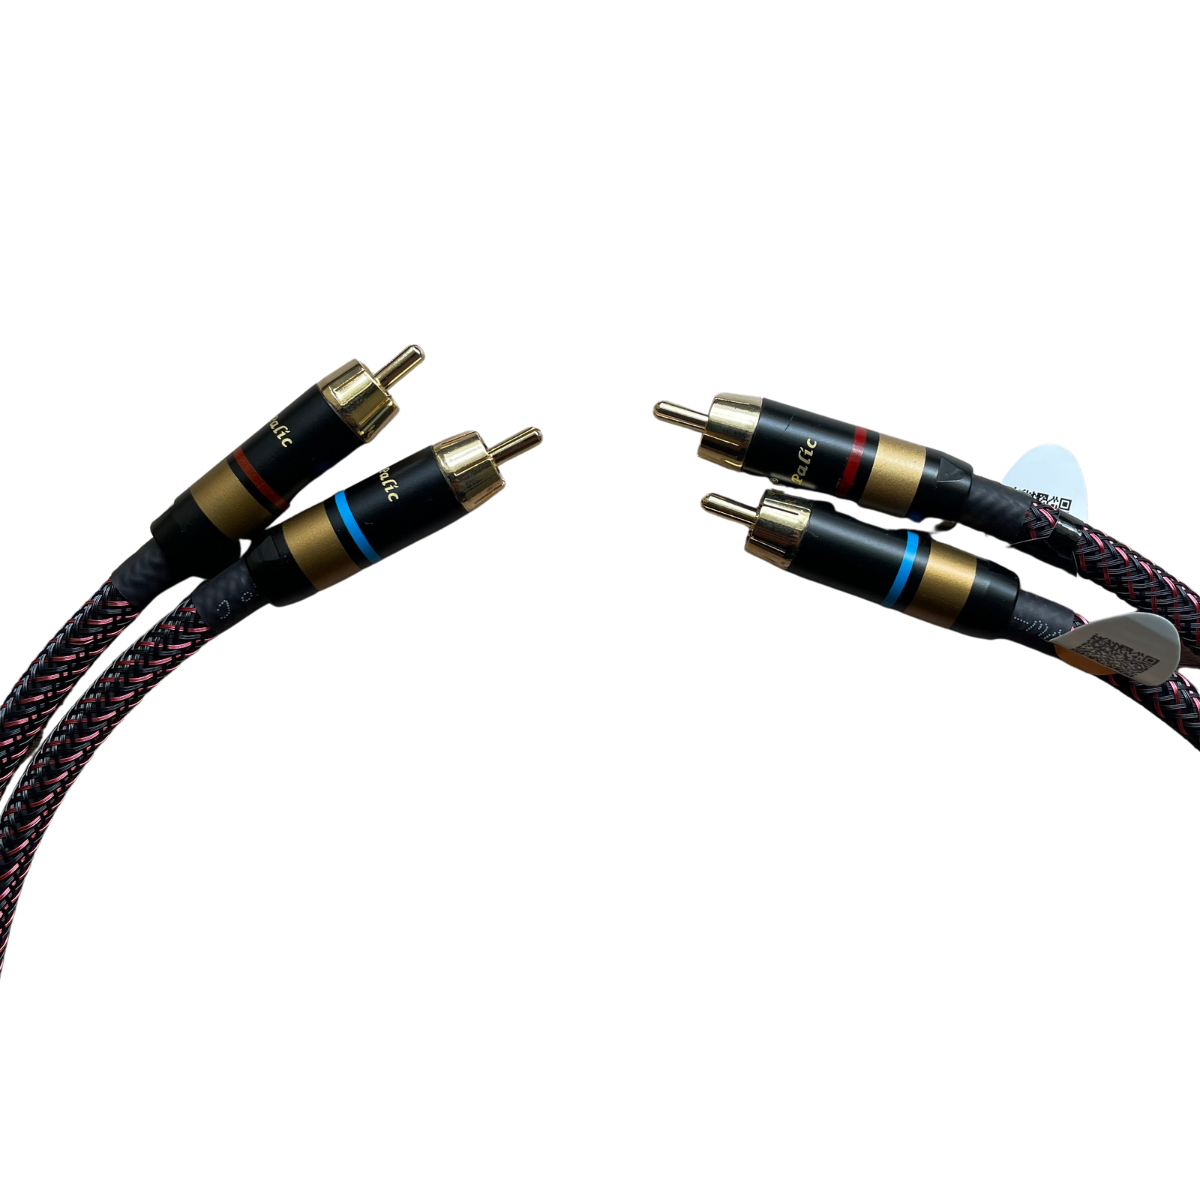 EarAudio Premium RCA Male To RCA Male Interconnects Cable